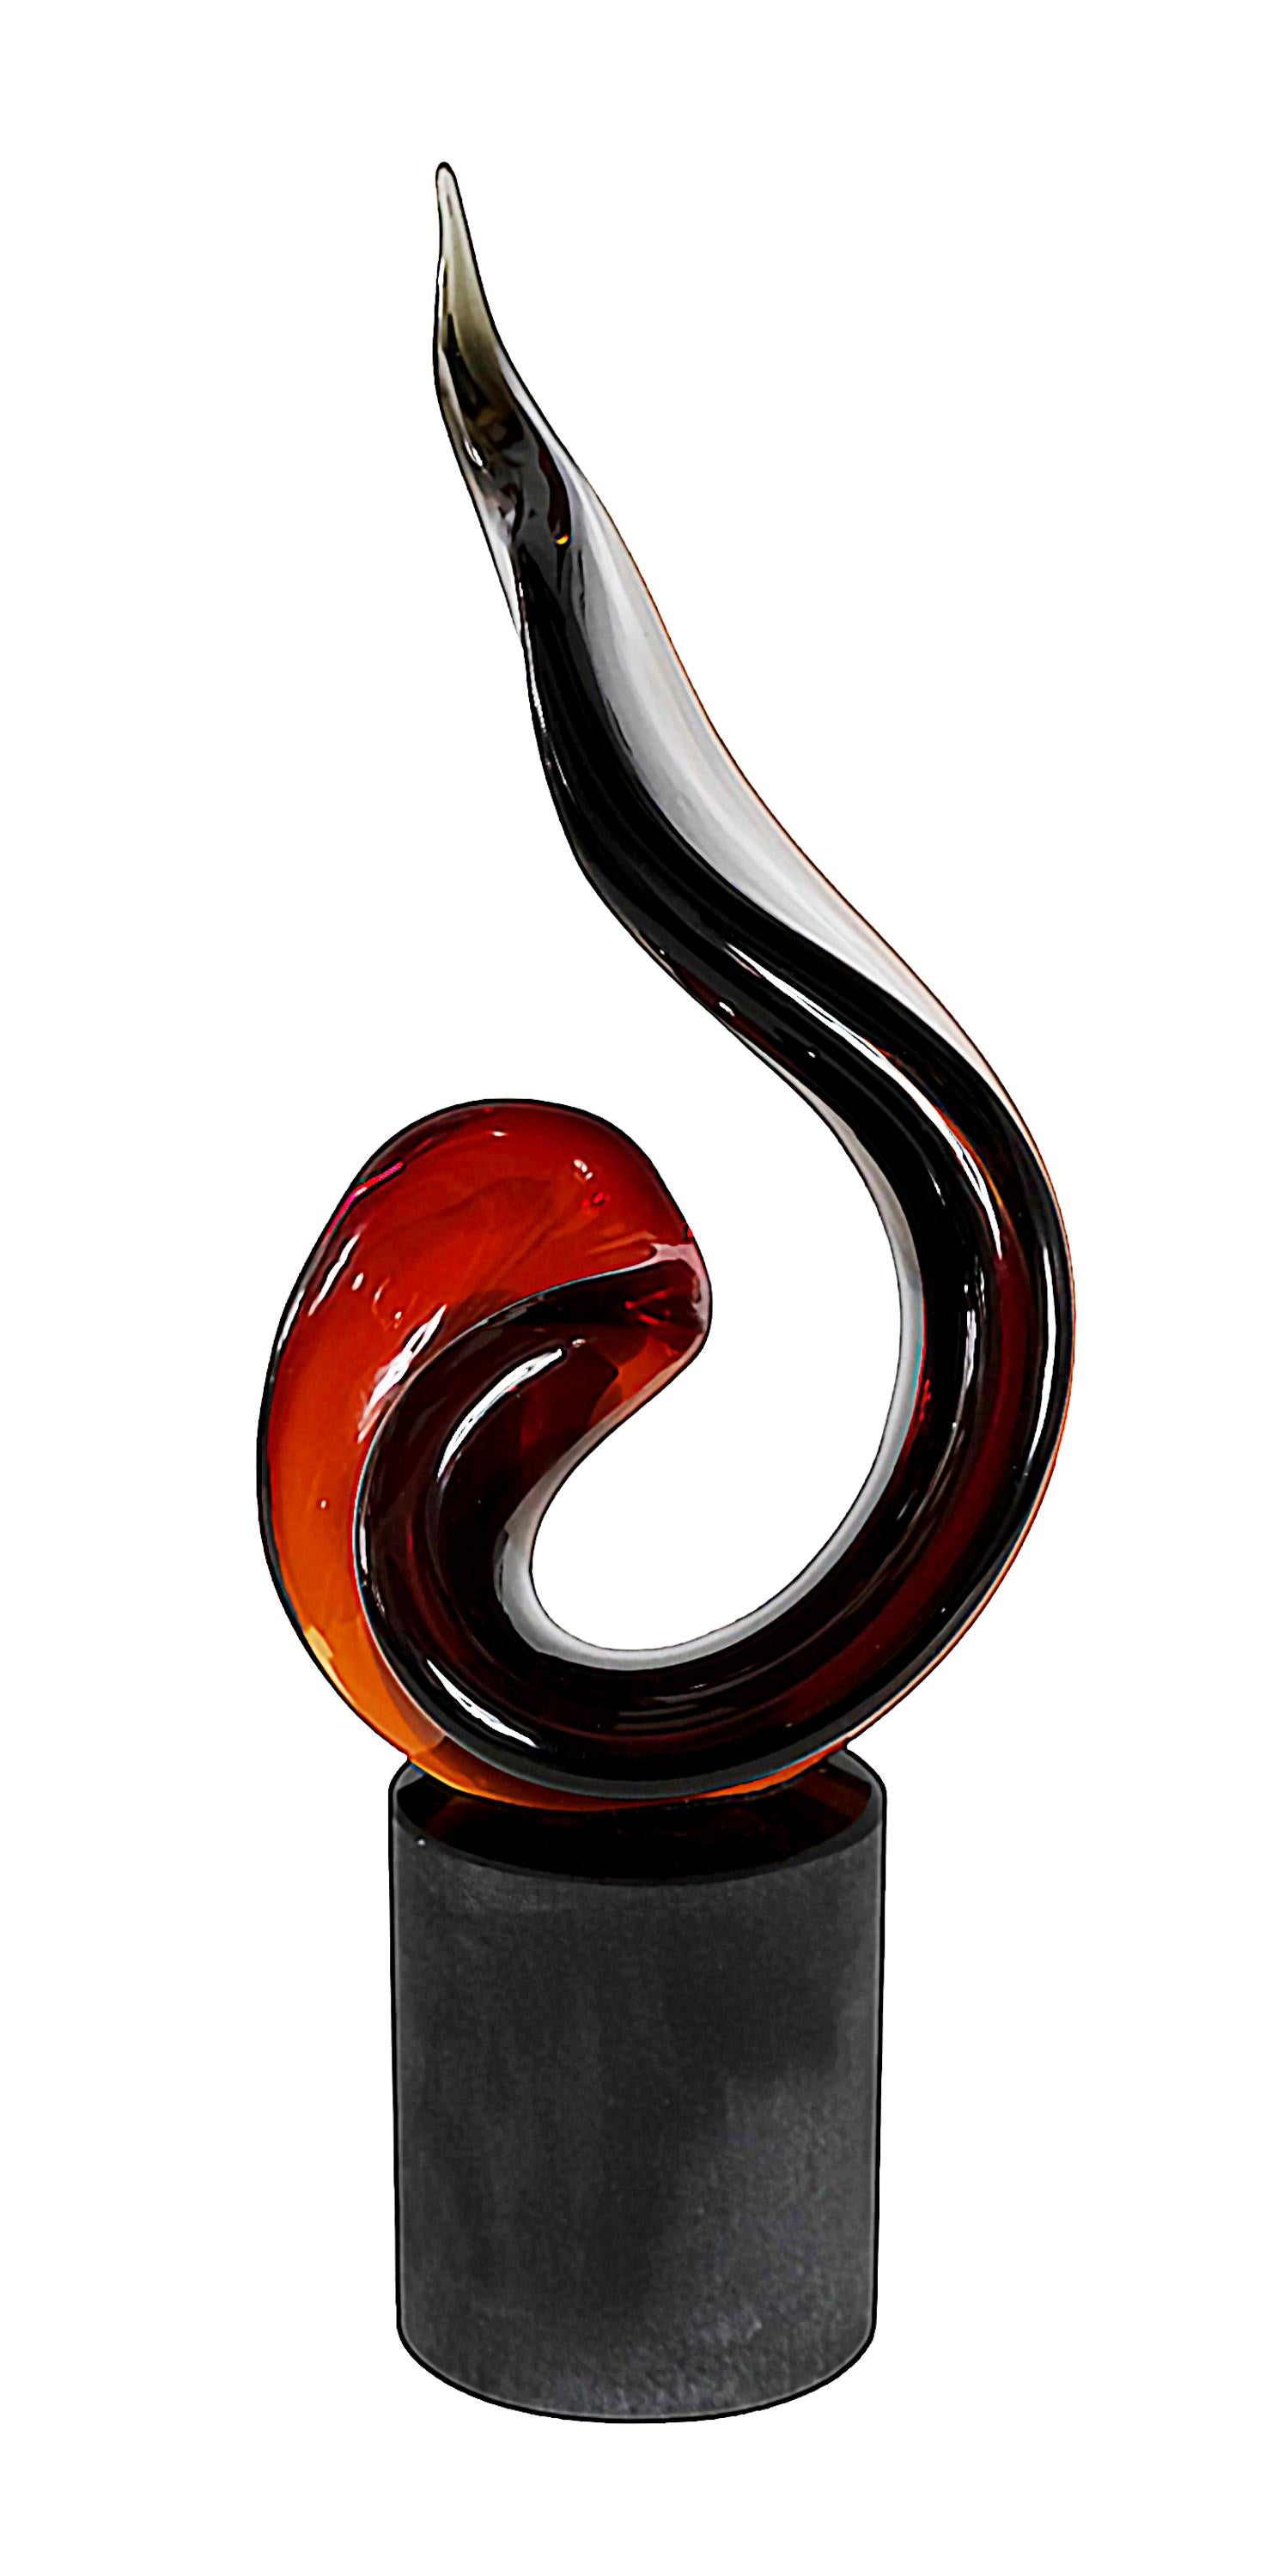 Italian handmade Murano glass abstract design sculpture.
Created and signed by Romano Dona.
The base is round in frosted black solid heavy glass. 
The sculpture element is in transition red, brown, grey color tones in the form of flame.

 